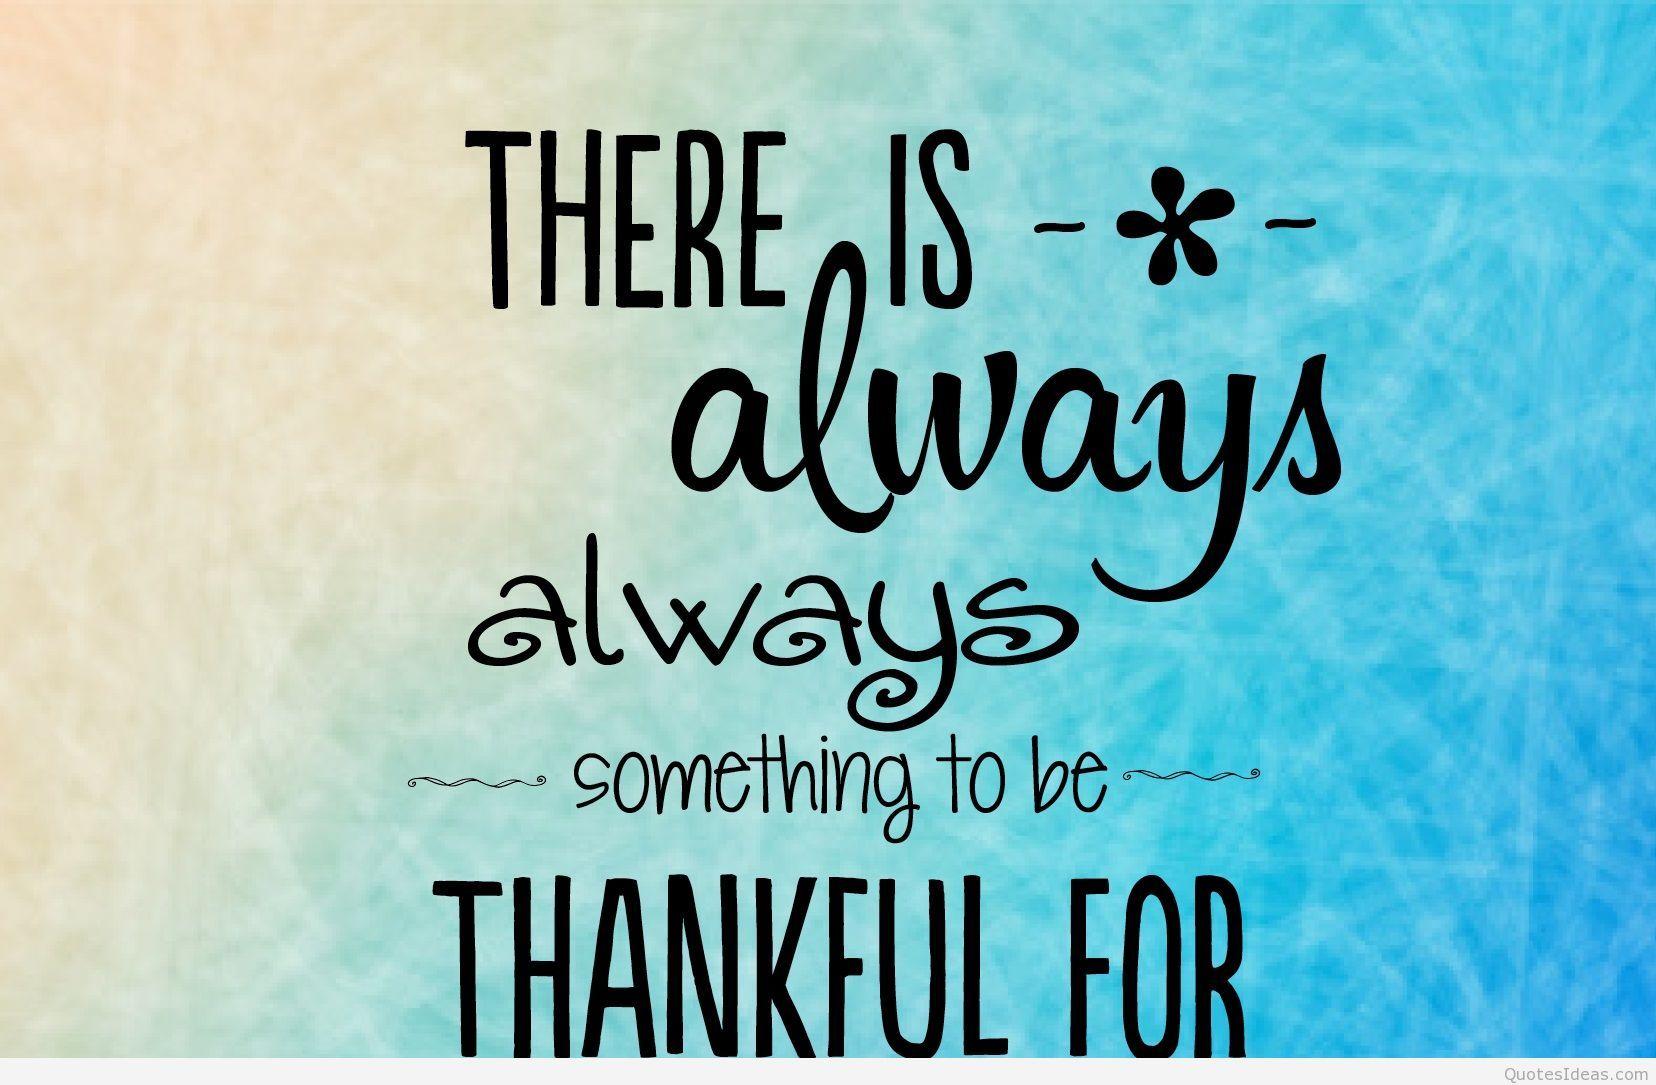 Thankful quote HD wallpaper 2015